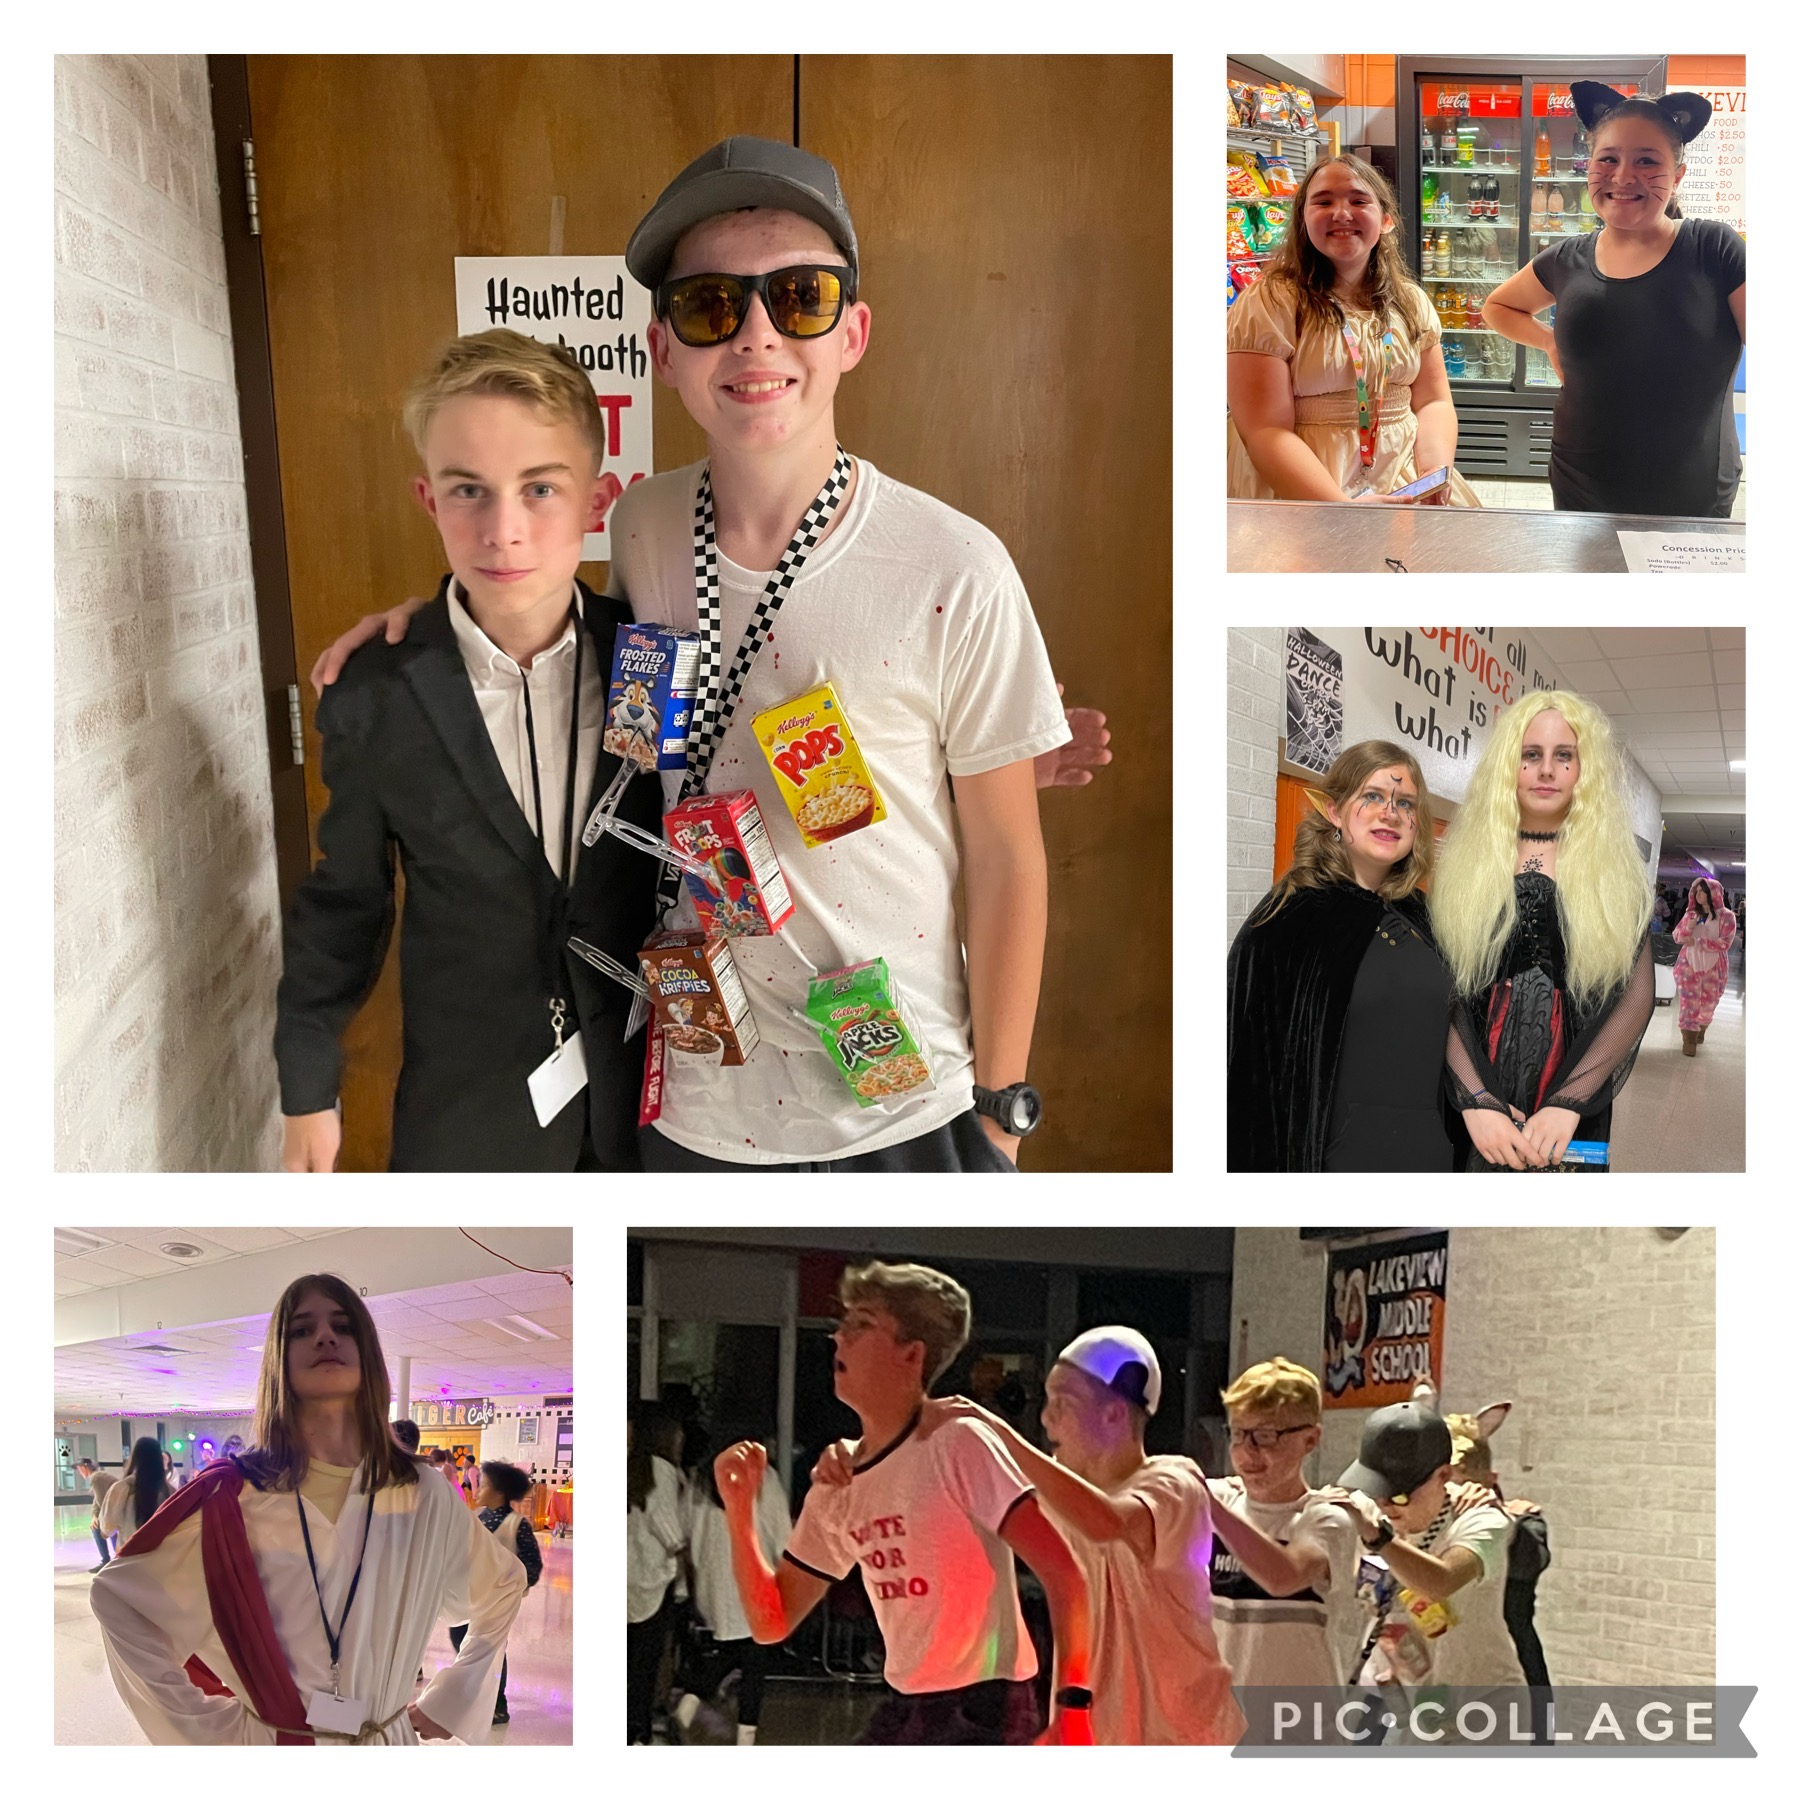 Students posing in their halloween costumes. An investigator and a "cereal killer", a cat and an elf, another elf and a girl in a goth dress and long blonde wig, a student in a robe, and a group of students following napoleon dynamite